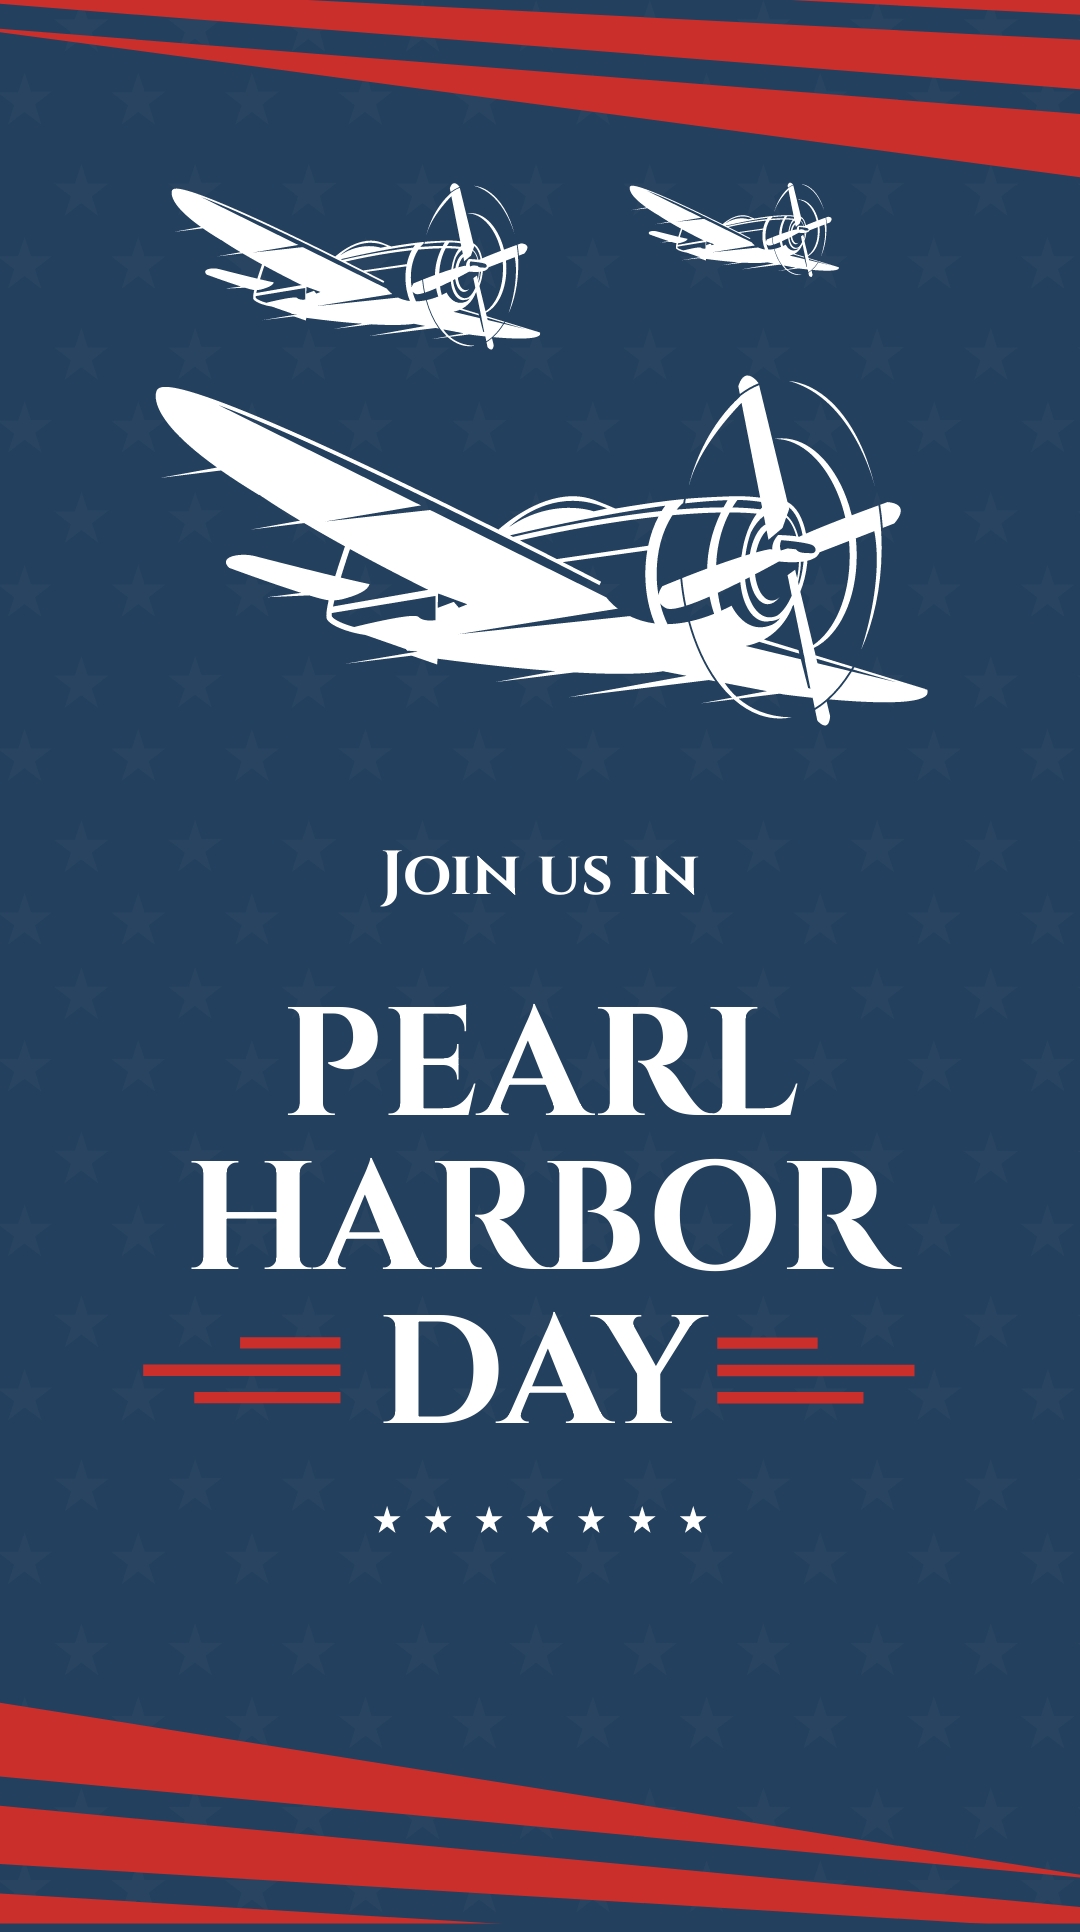 Pearl Harbor Day Event Whatsapp Post